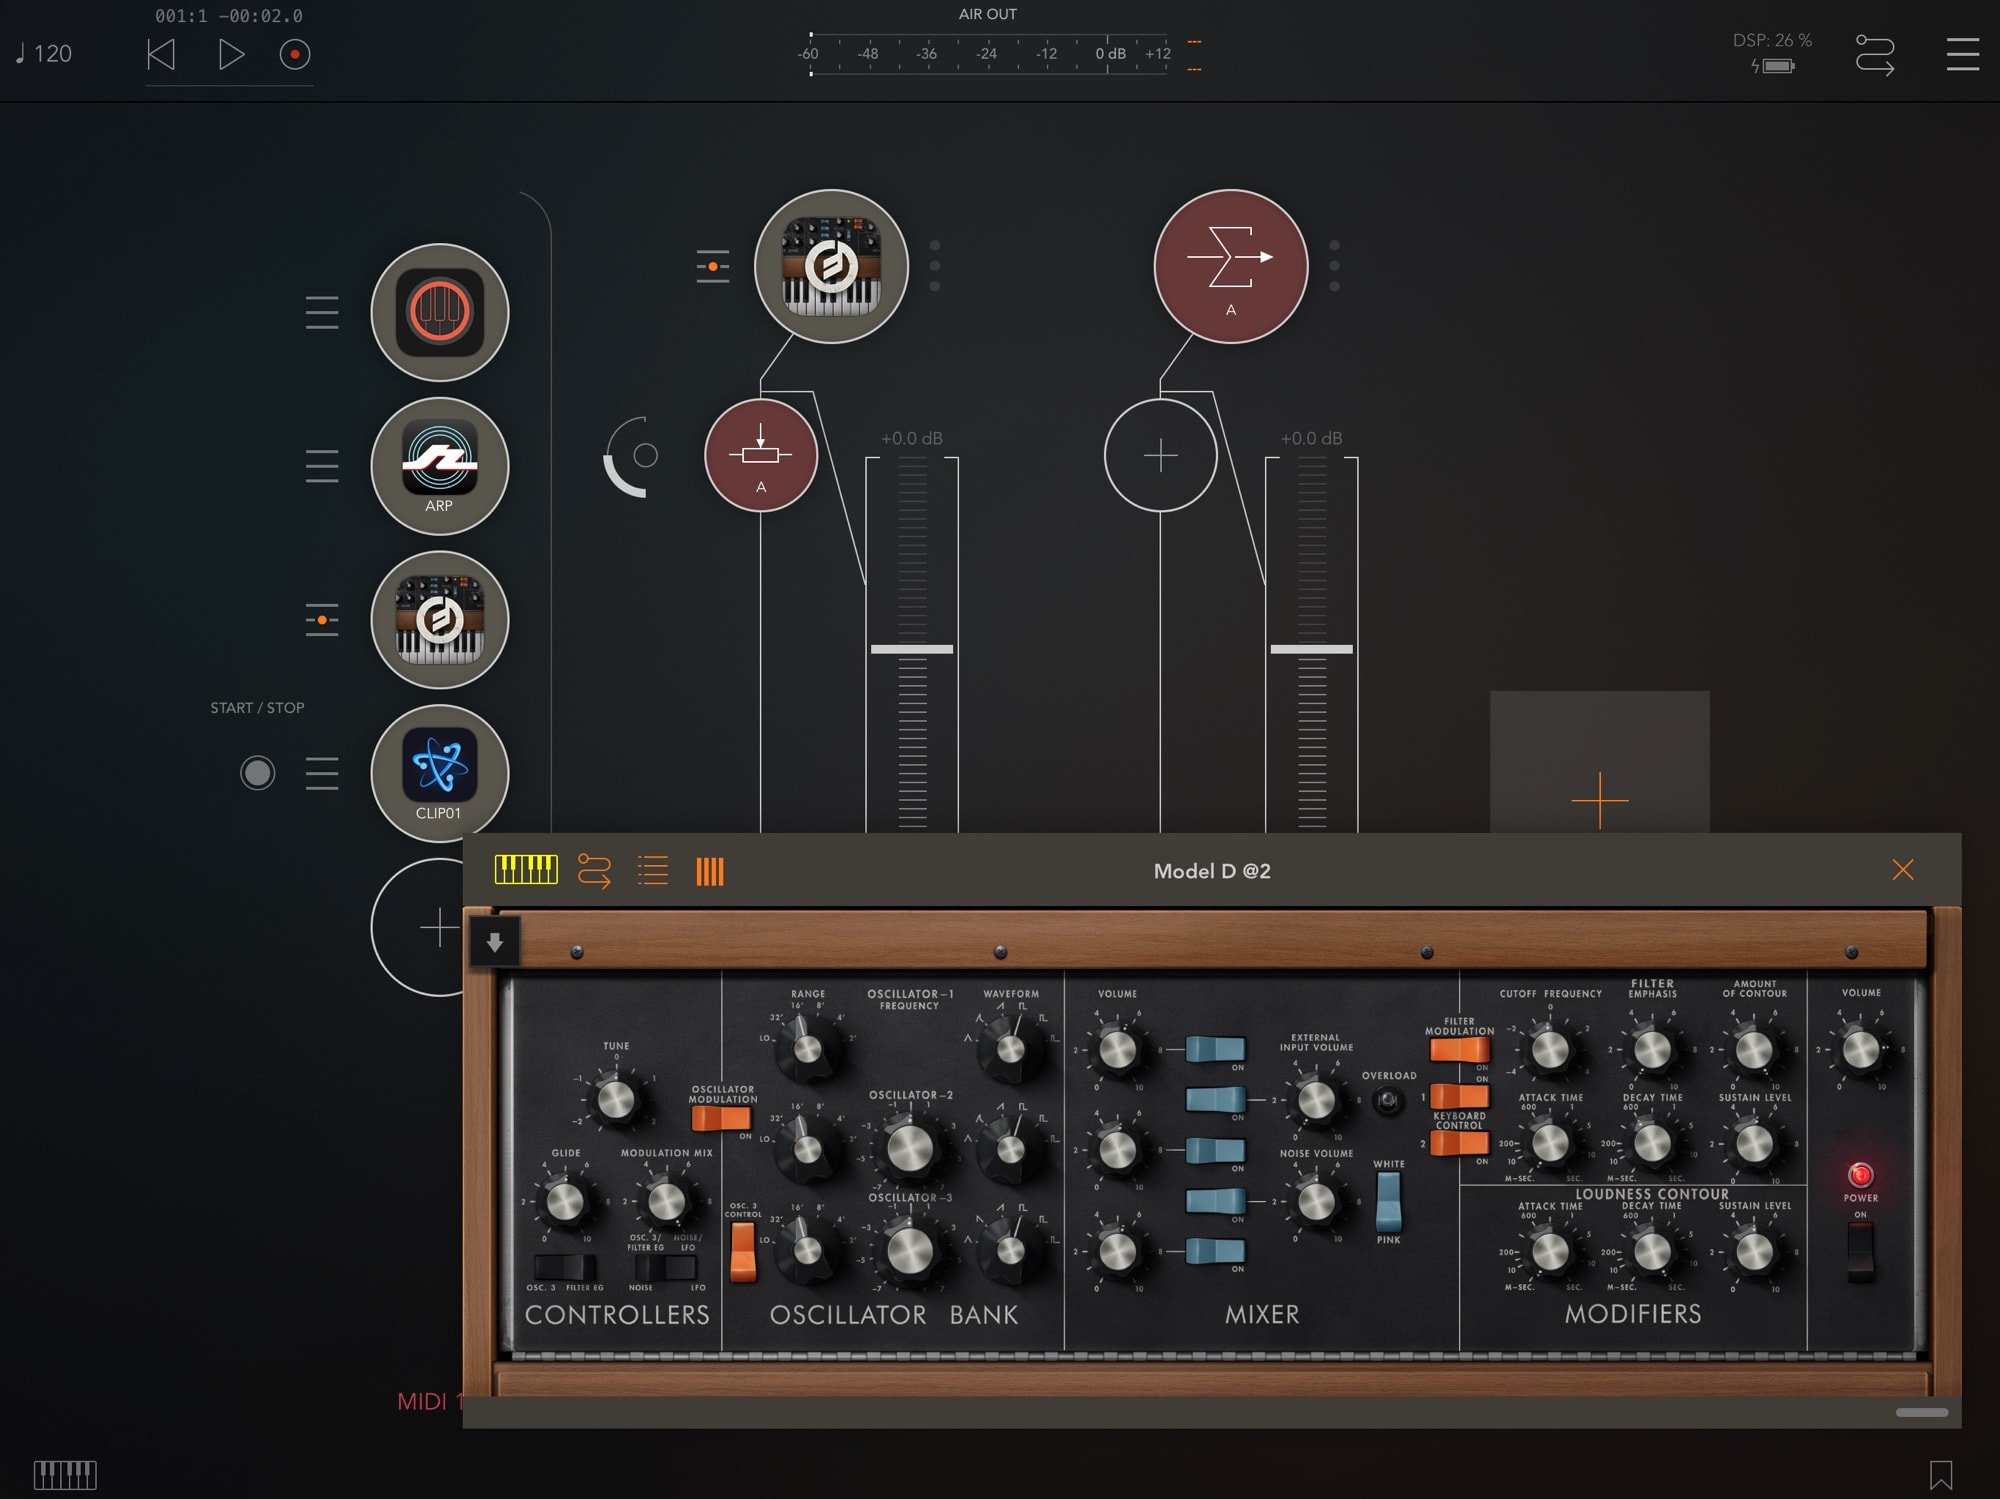 Check out the new MIDI strip on the left in the AUM audio mixer app.